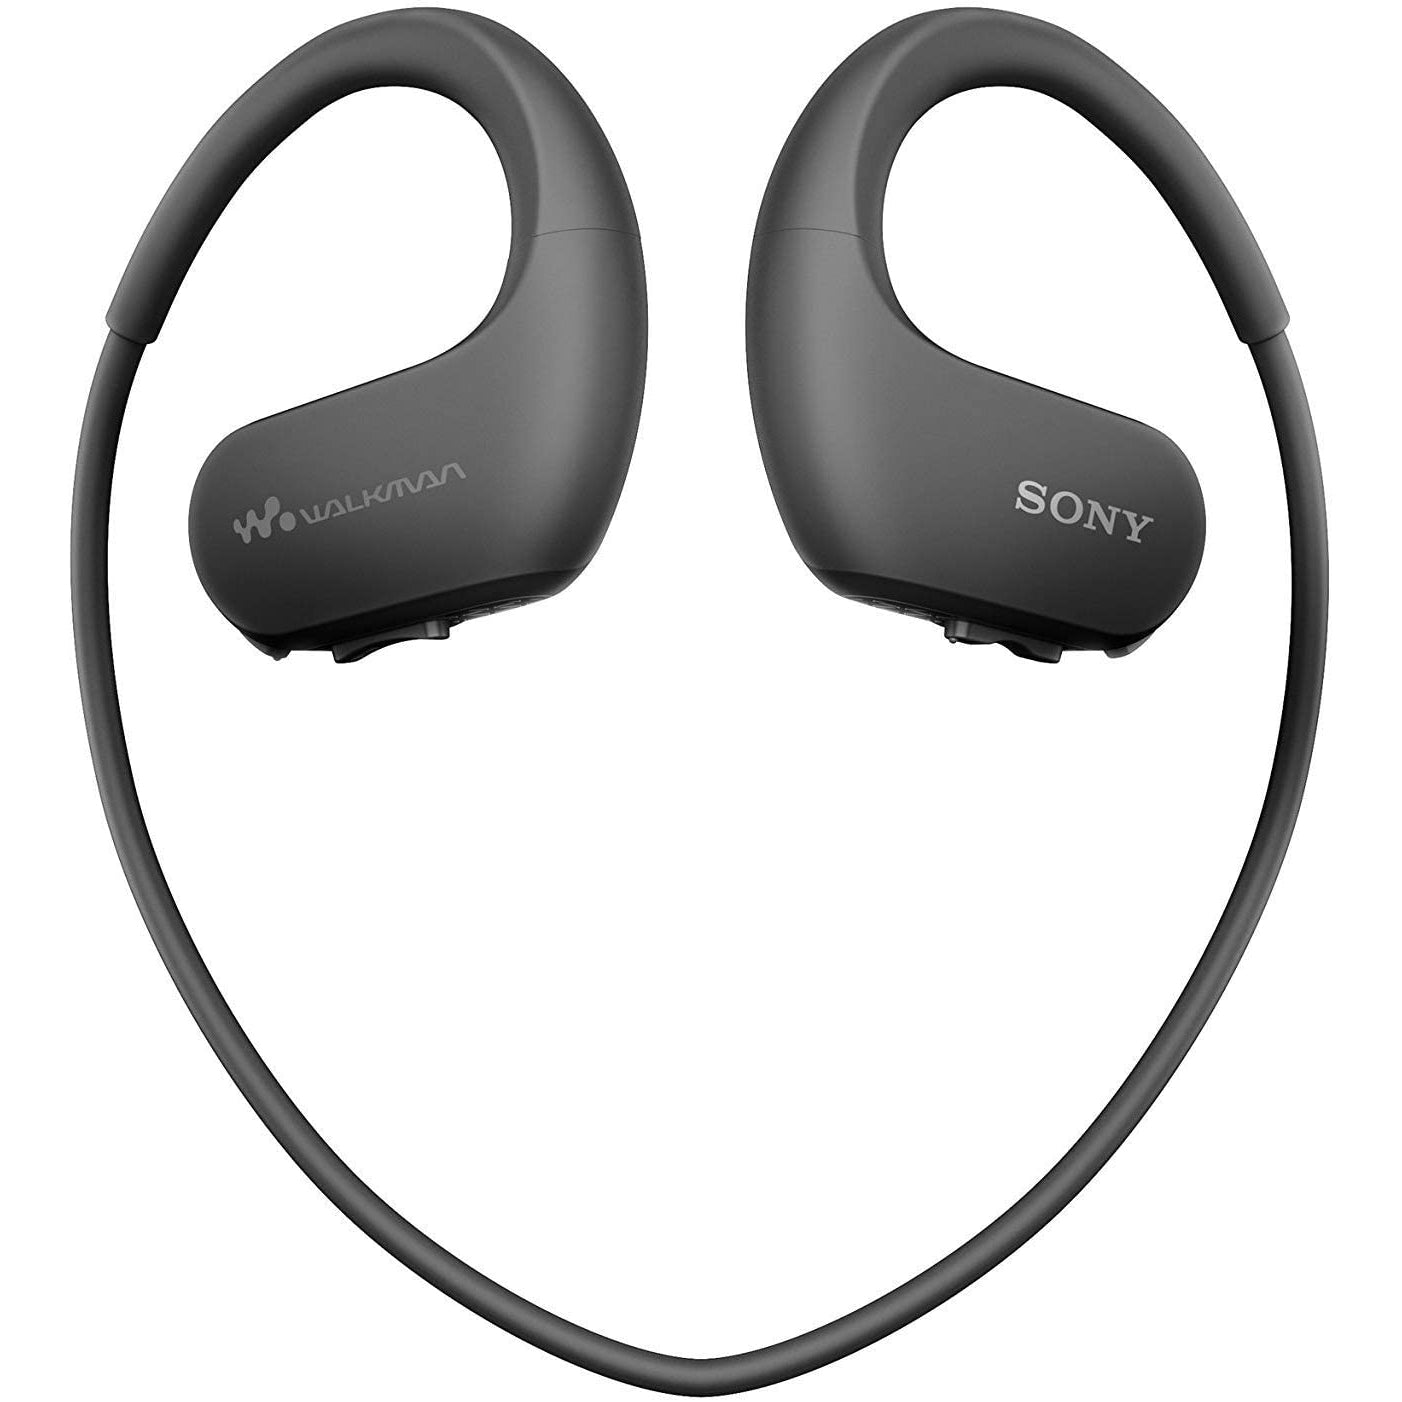 Sony NW-WS413 Waterproof All-in-One MP3 Player